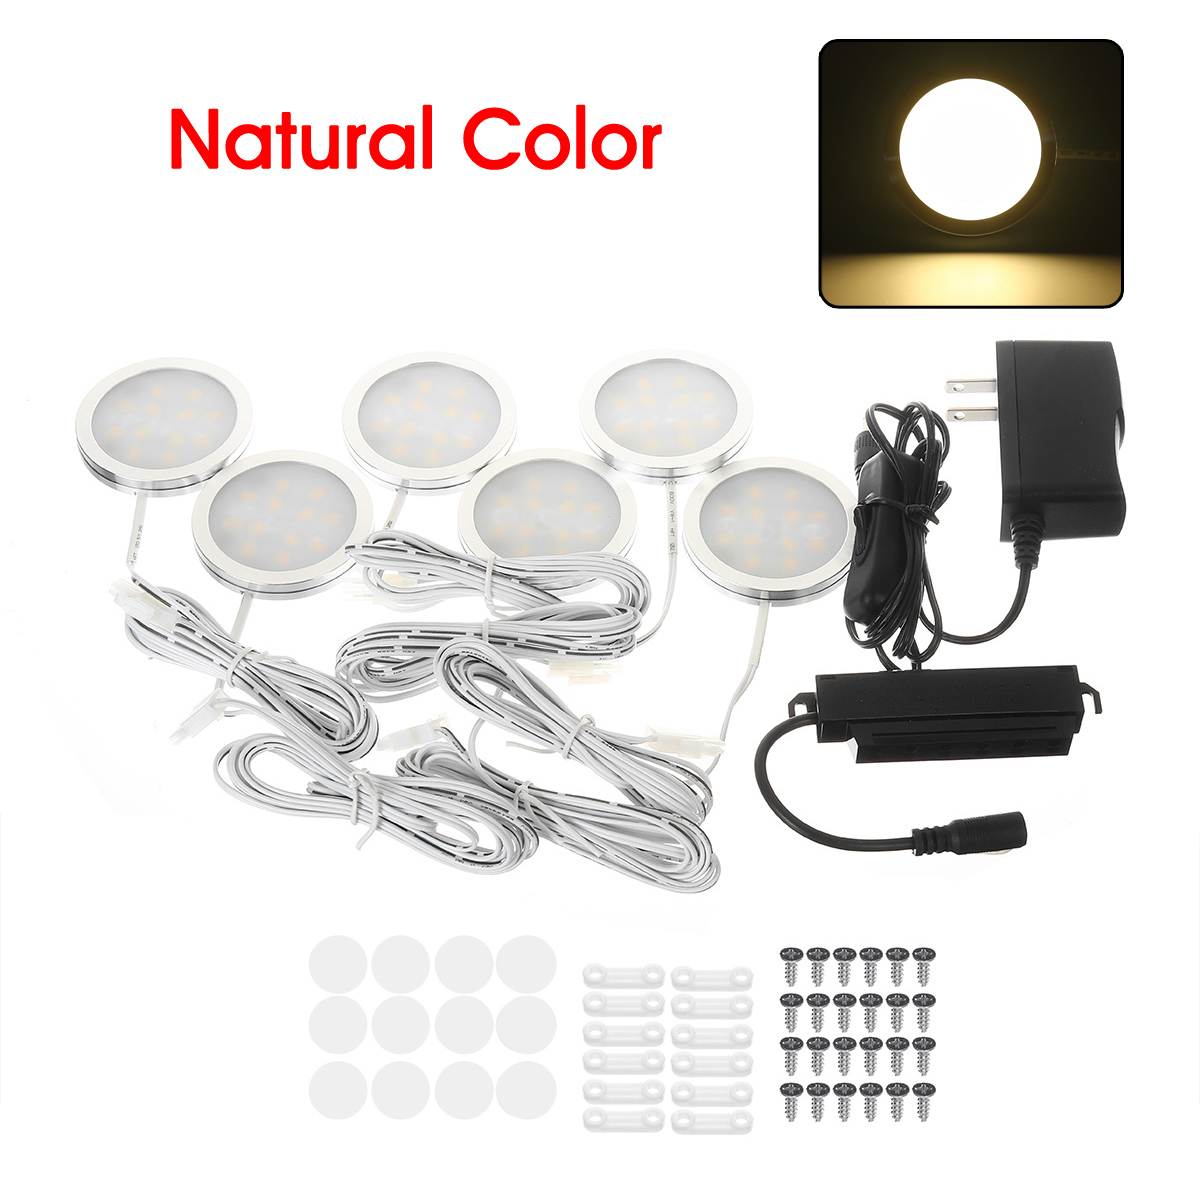 25W-6-In-1-LED-Under-Cabinet-Light-Ceiling-Panel-Down-Slim-Kitchen-Cupboard-Recessed-Lamp-DC12V-1705748-5